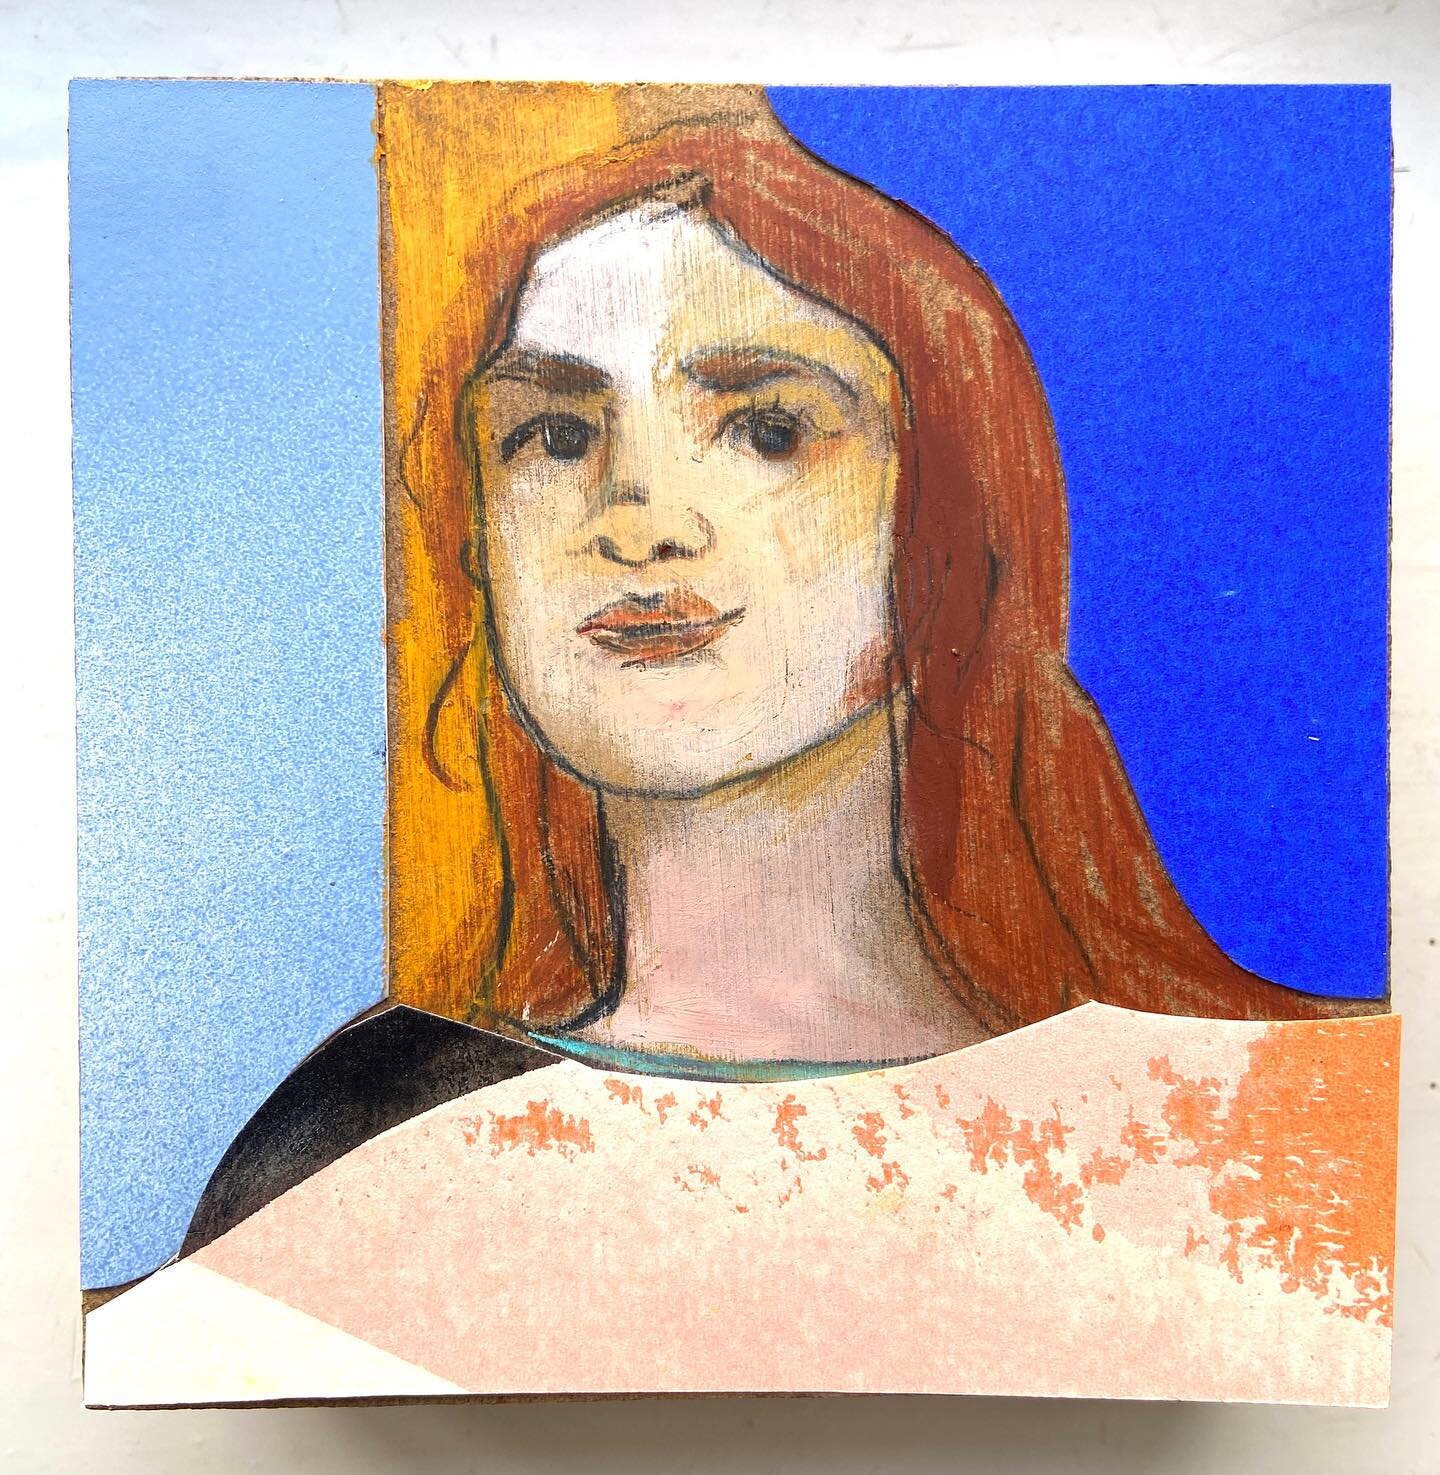 .
.
Sneak Peak to one of the miniatures I made for Belles Choses 03!!
So much abstract forms lately, I thought I go for some old school portraits (plus of course some abstract layers in the background (:)
.
This is &bdquo;Tilda&ldquo;, 10x10cm waitin